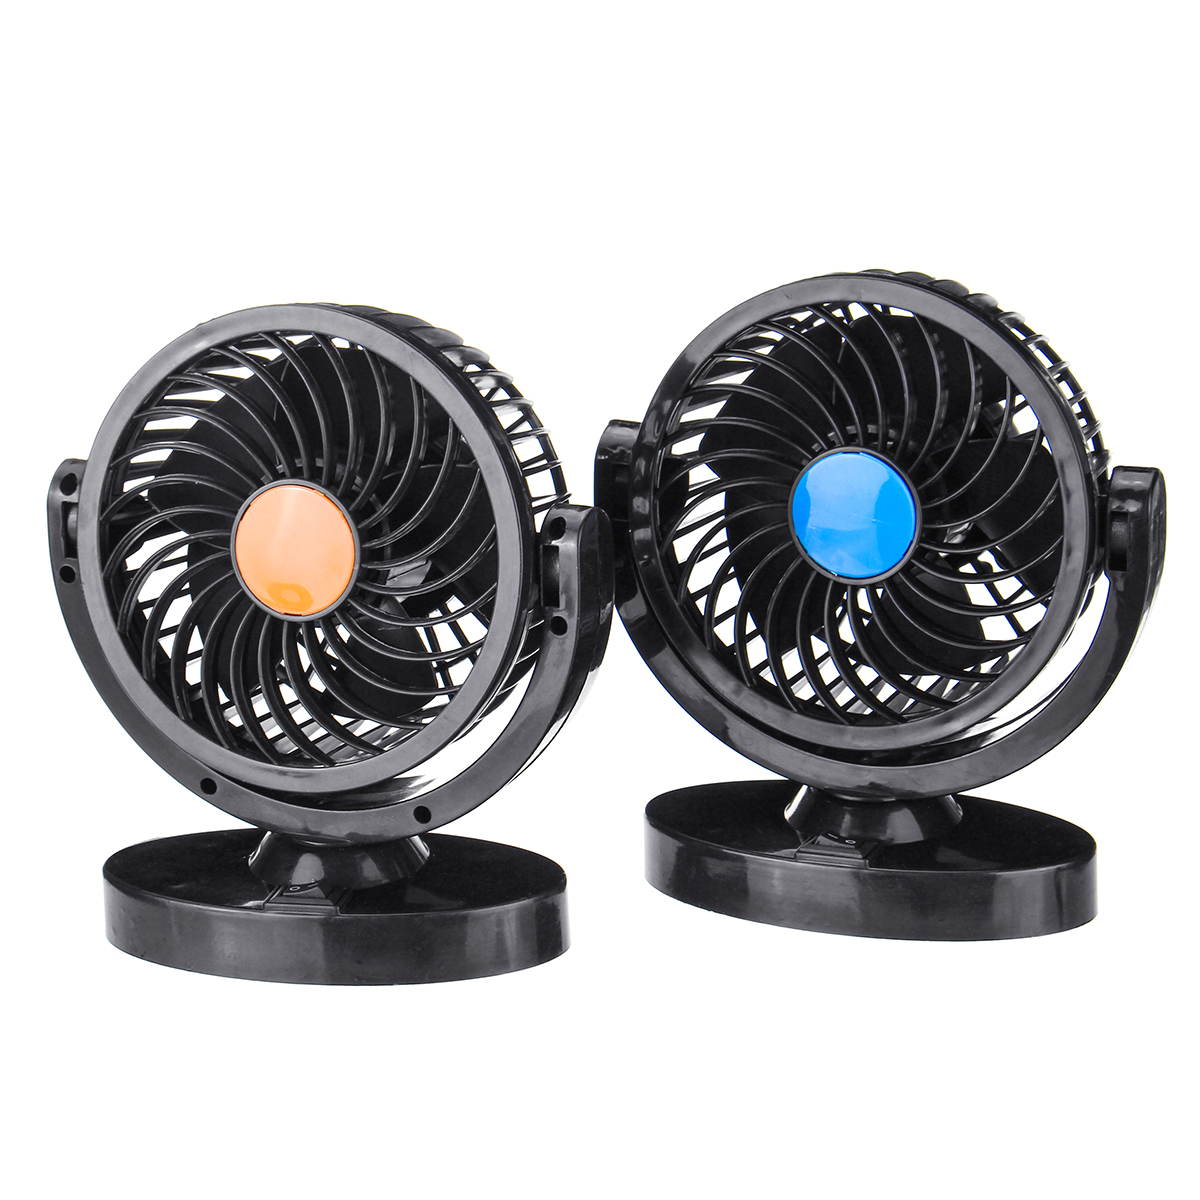 DC-12V24V-360deg-All-Round-Mini-Auto-Air-Cooling-Fan-Adjustable-Low-Noise-1466573-2